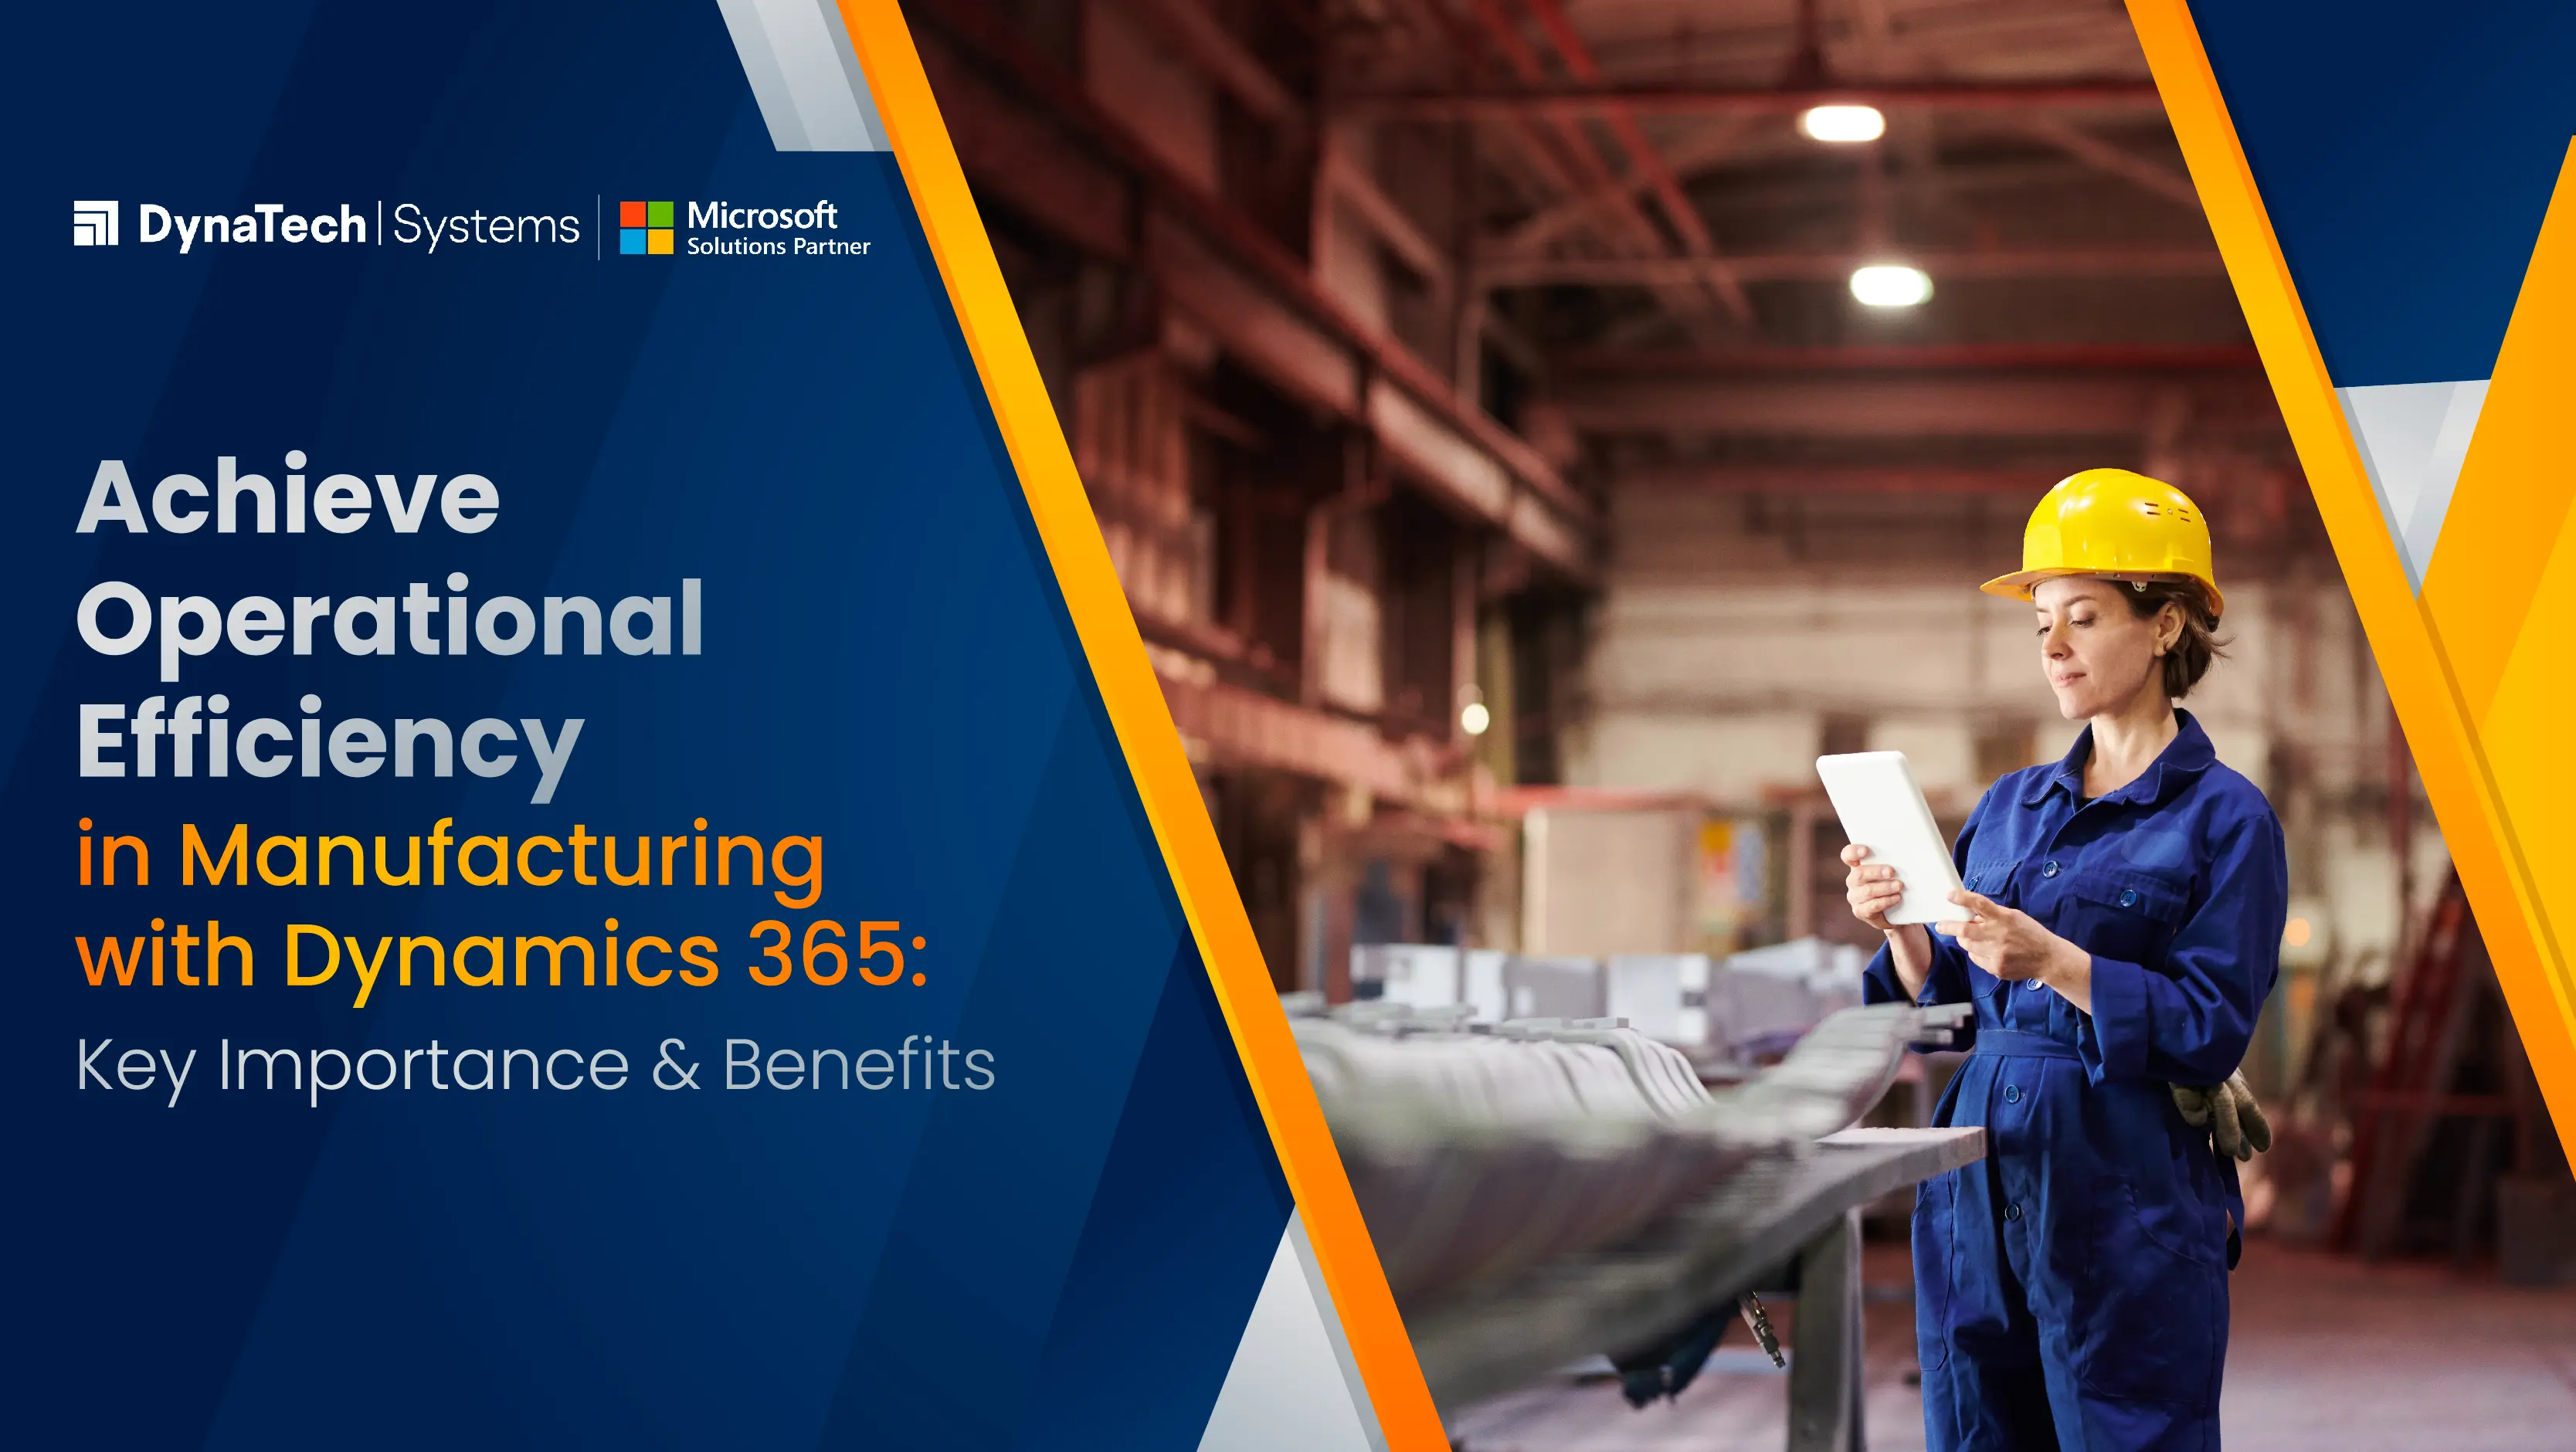 Achieve Operational Efficiency in Manufacturing with Dynamics 365: Key Importance & Benefits